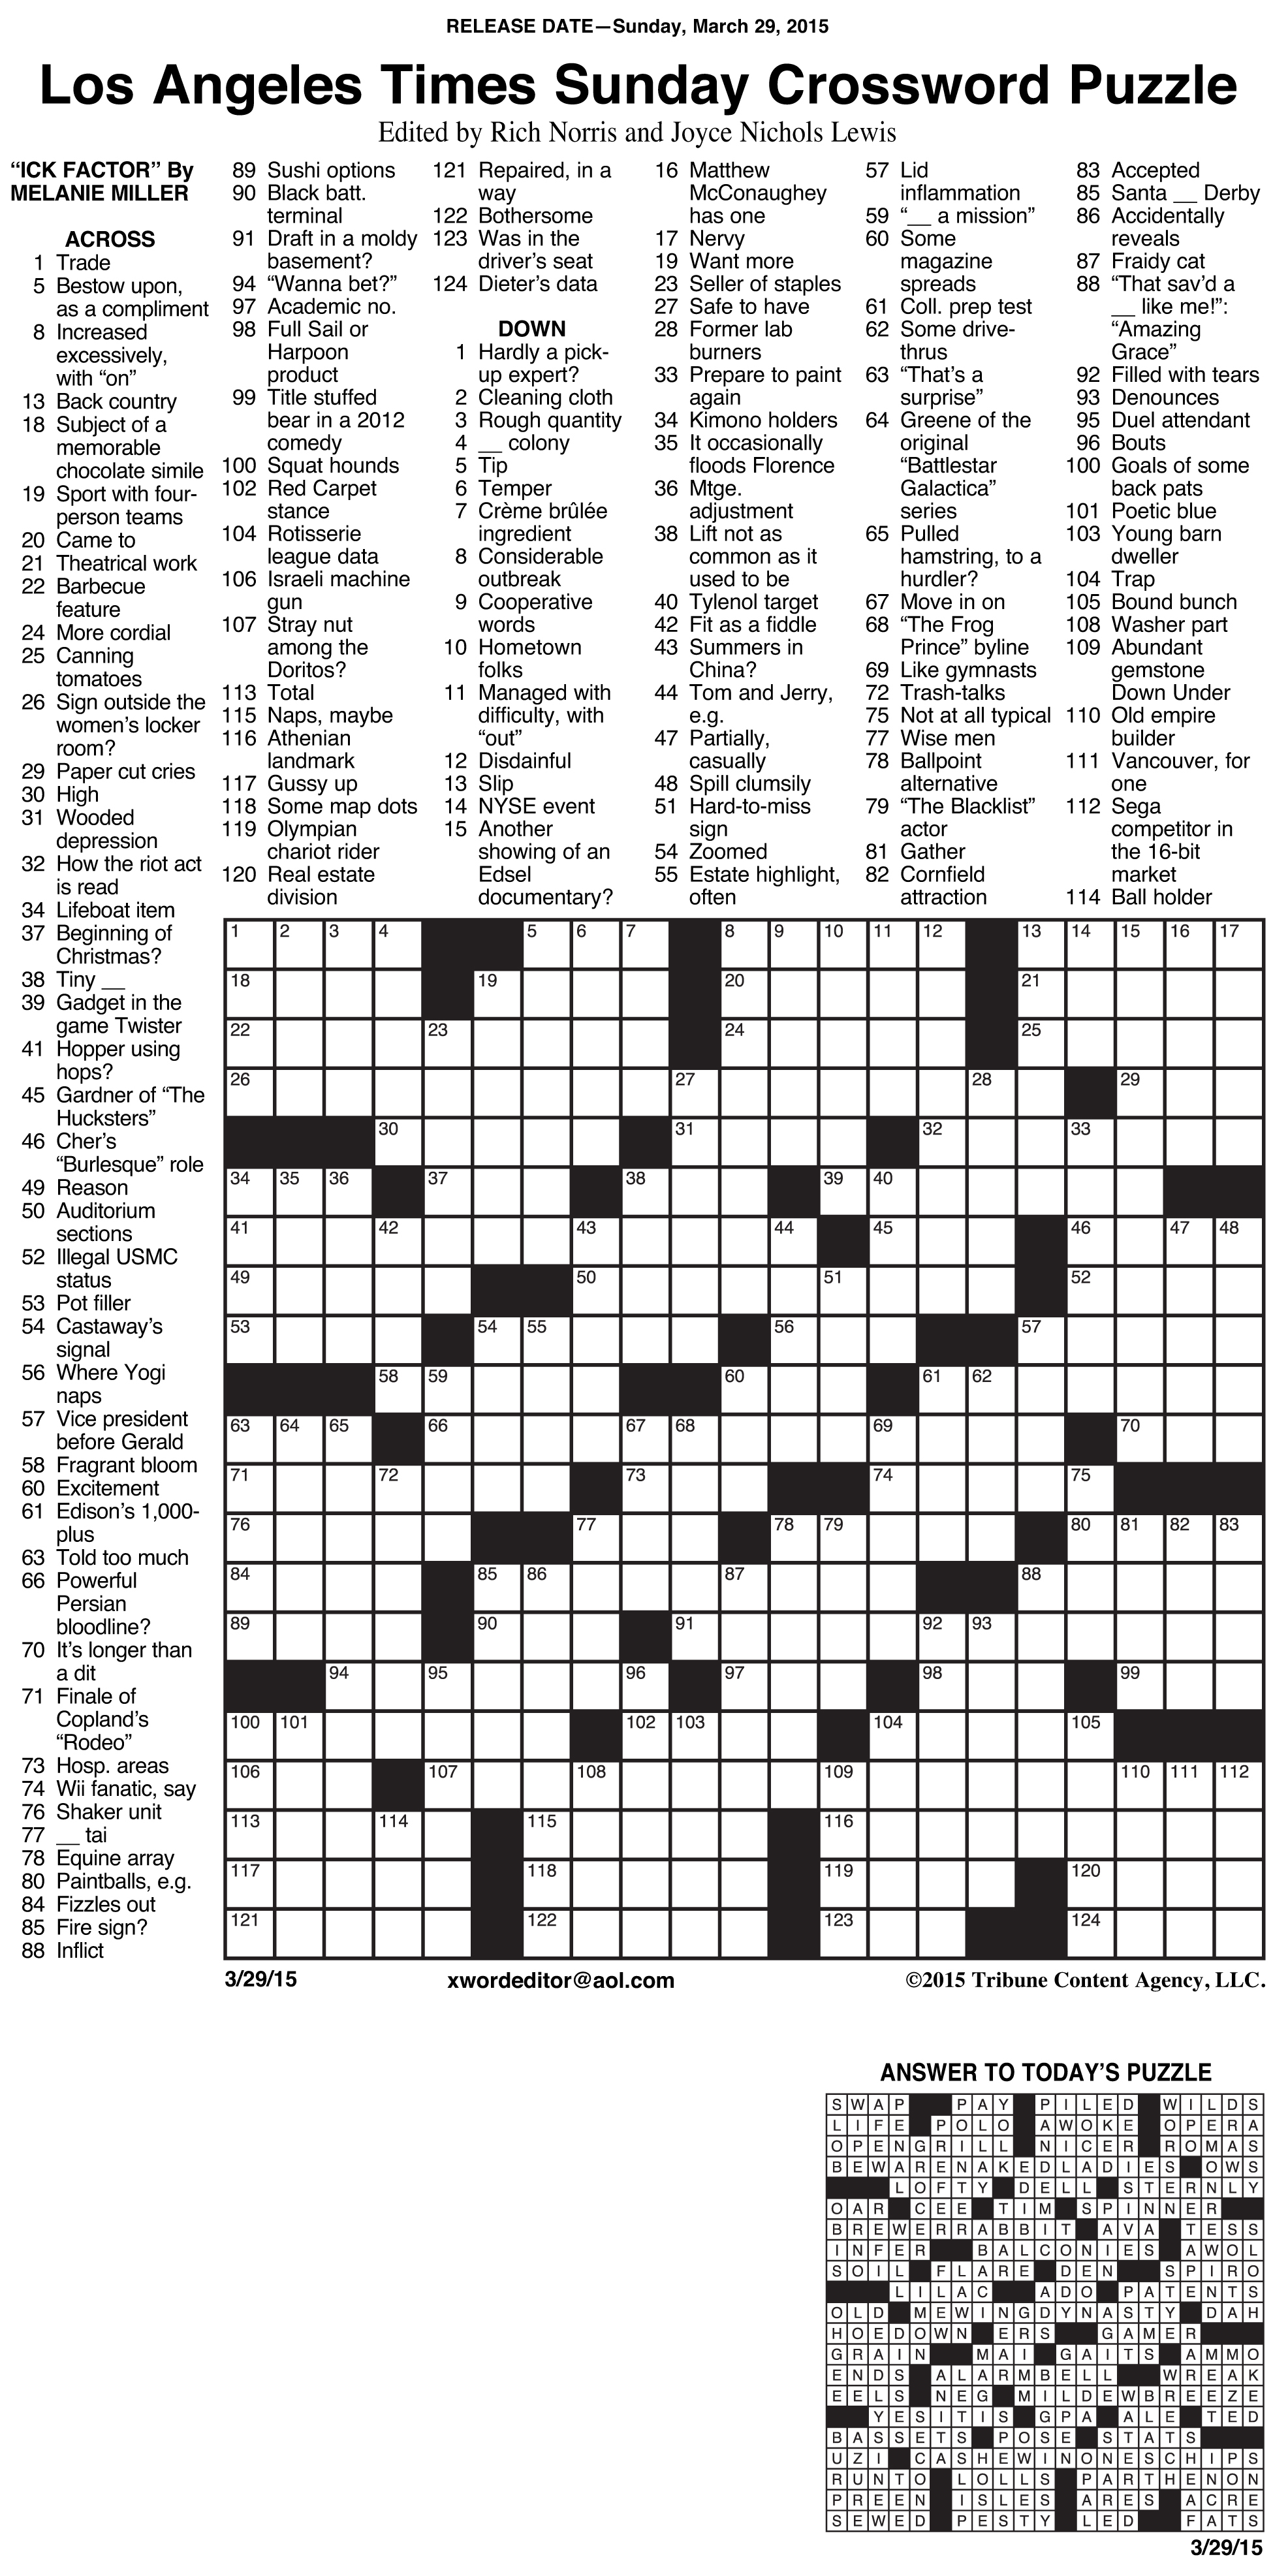 Sample Of Los Angeles Times Sunday Crossword Puzzle | Tribune - Los Angeles Times Crossword Puzzle Printable